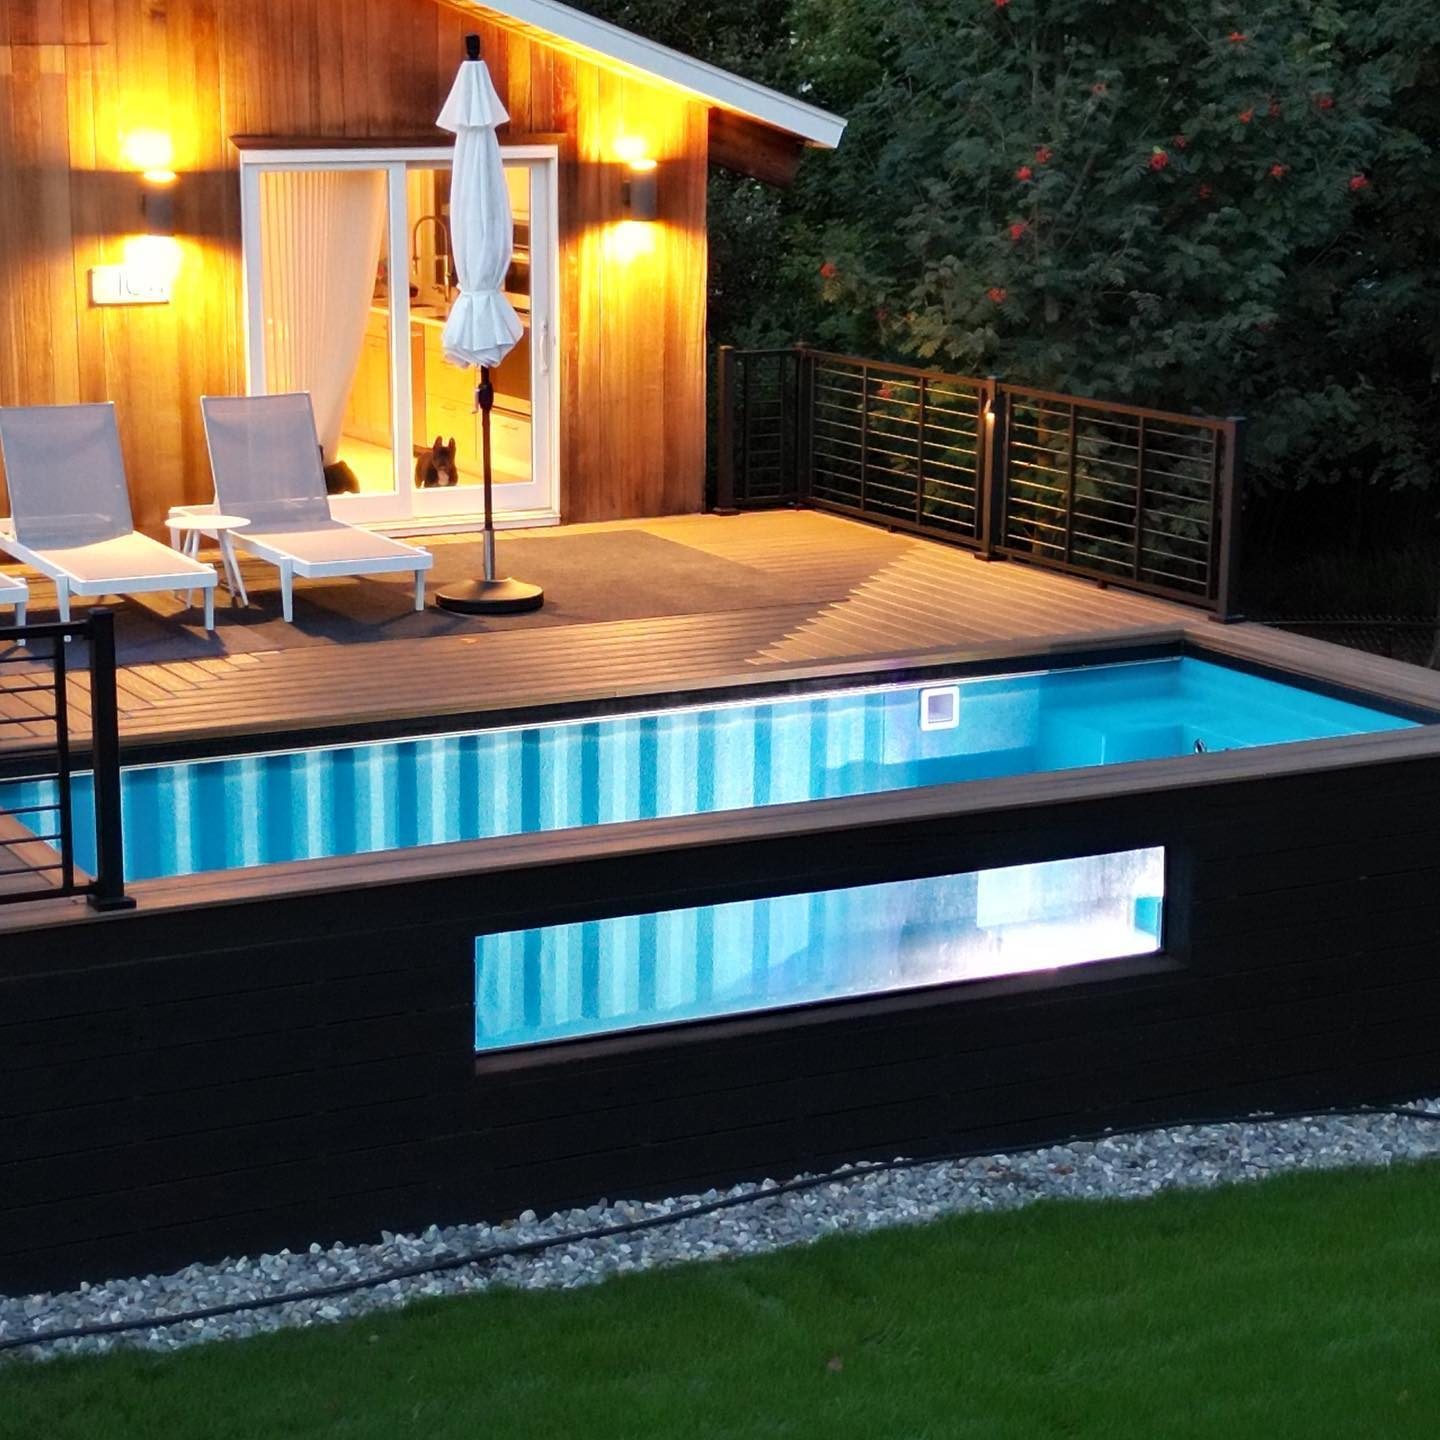 8 Affordable Above-Ground Pool Ideas for Enjoyable Backyard Escapes